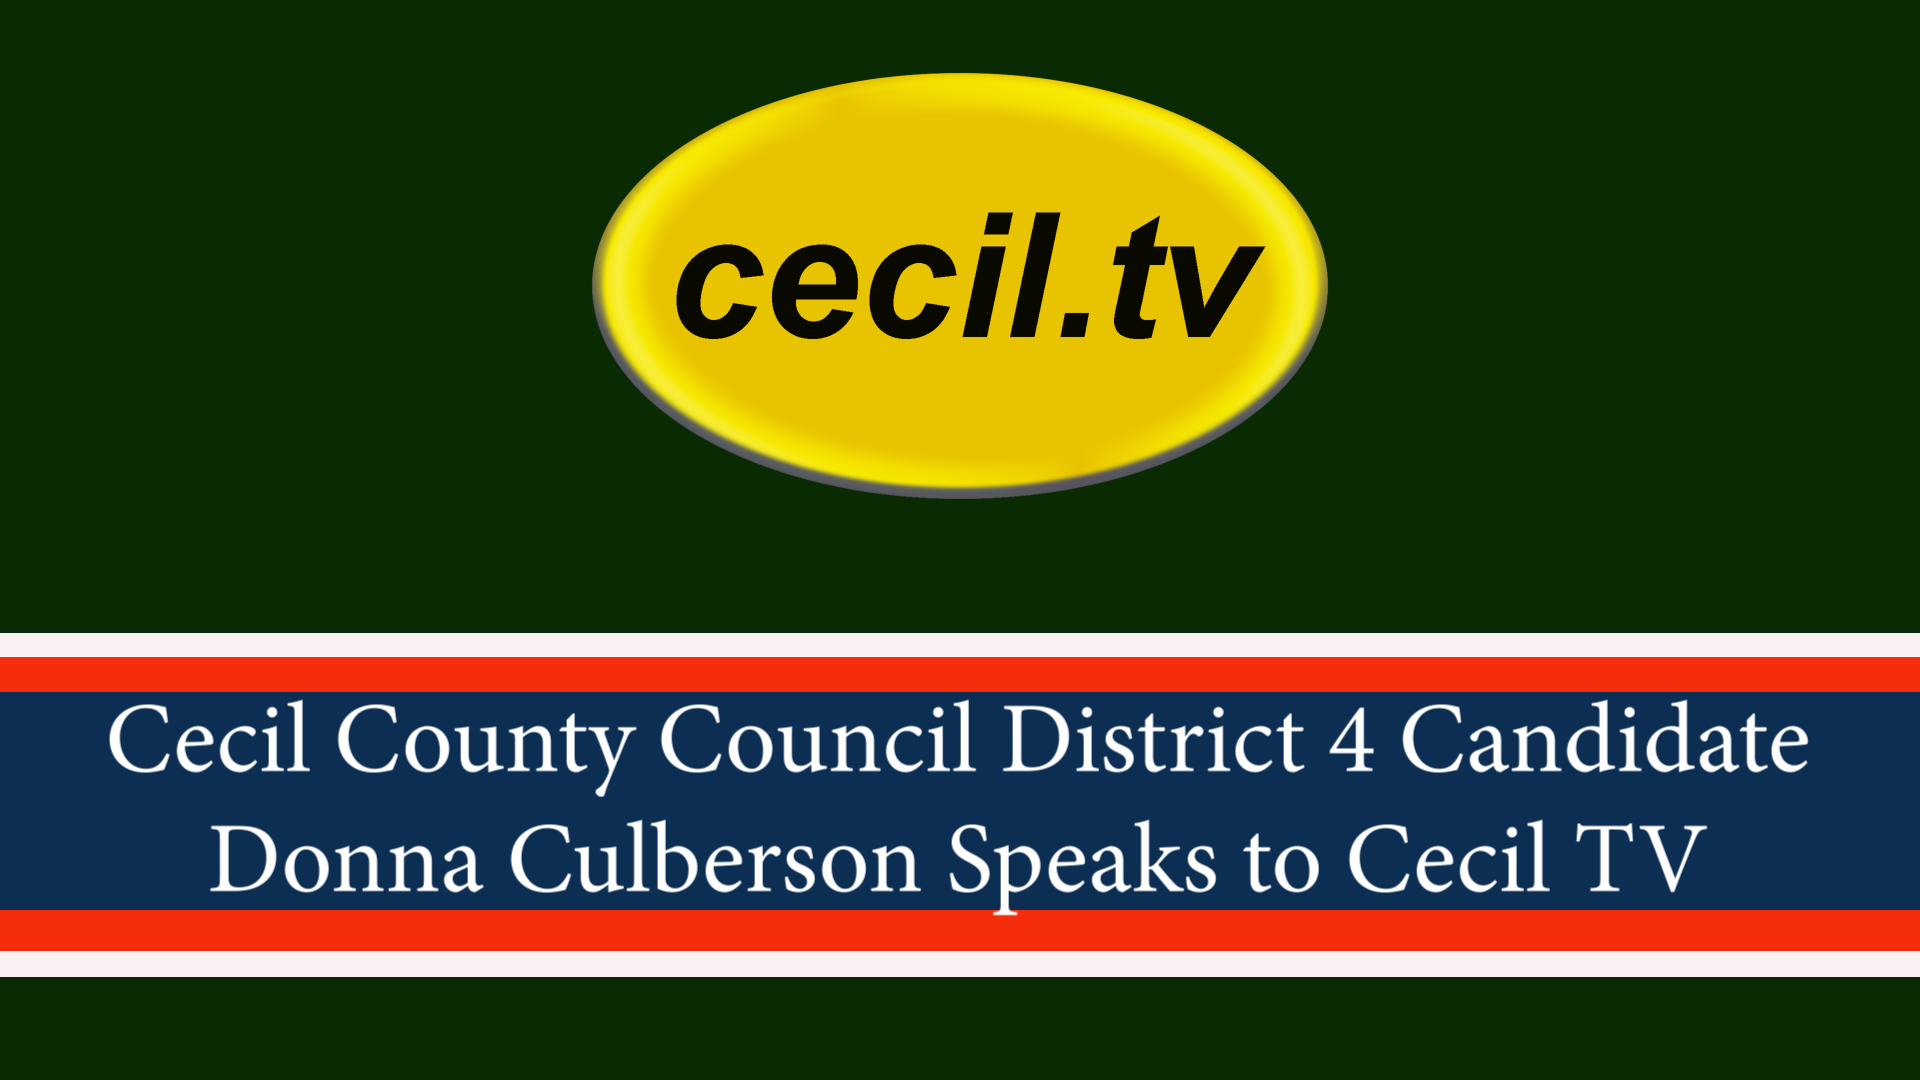 Cecil County Council District 4 Candidate Donna Culberson Speaks to Cecil TV